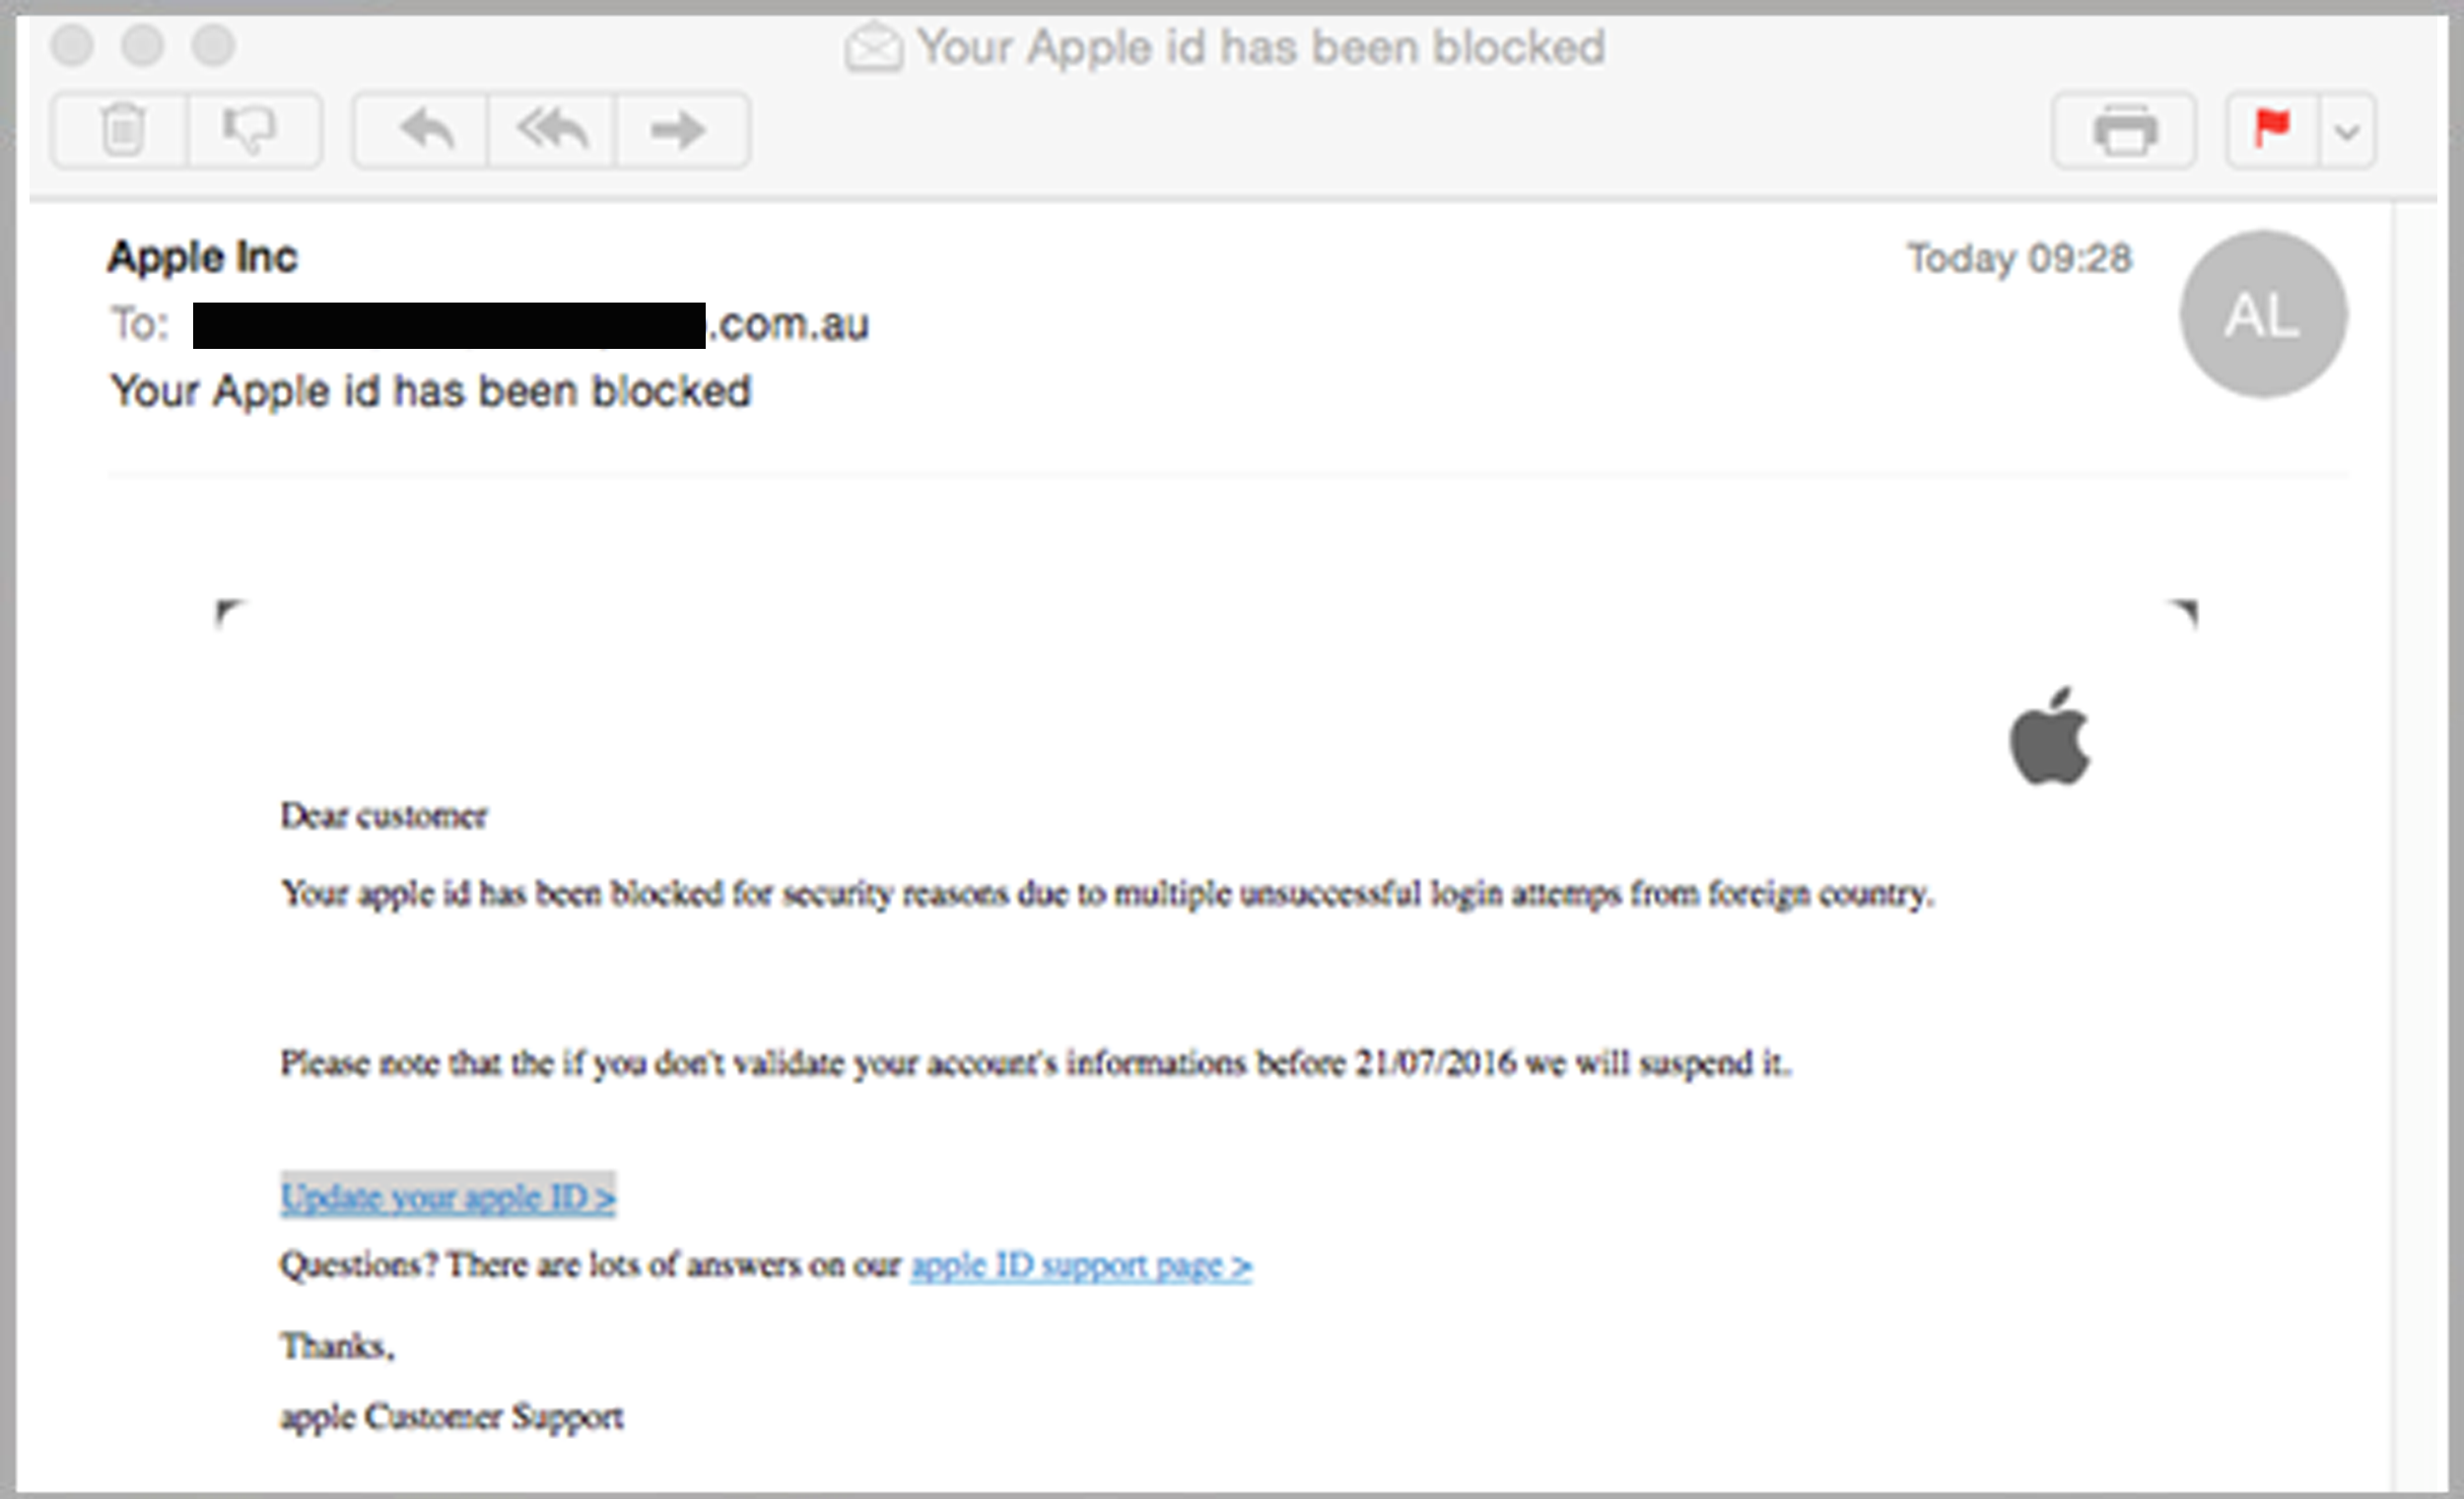 MailGuard_Apple_Email_Phishing_Scam_Sample_July_2016.png